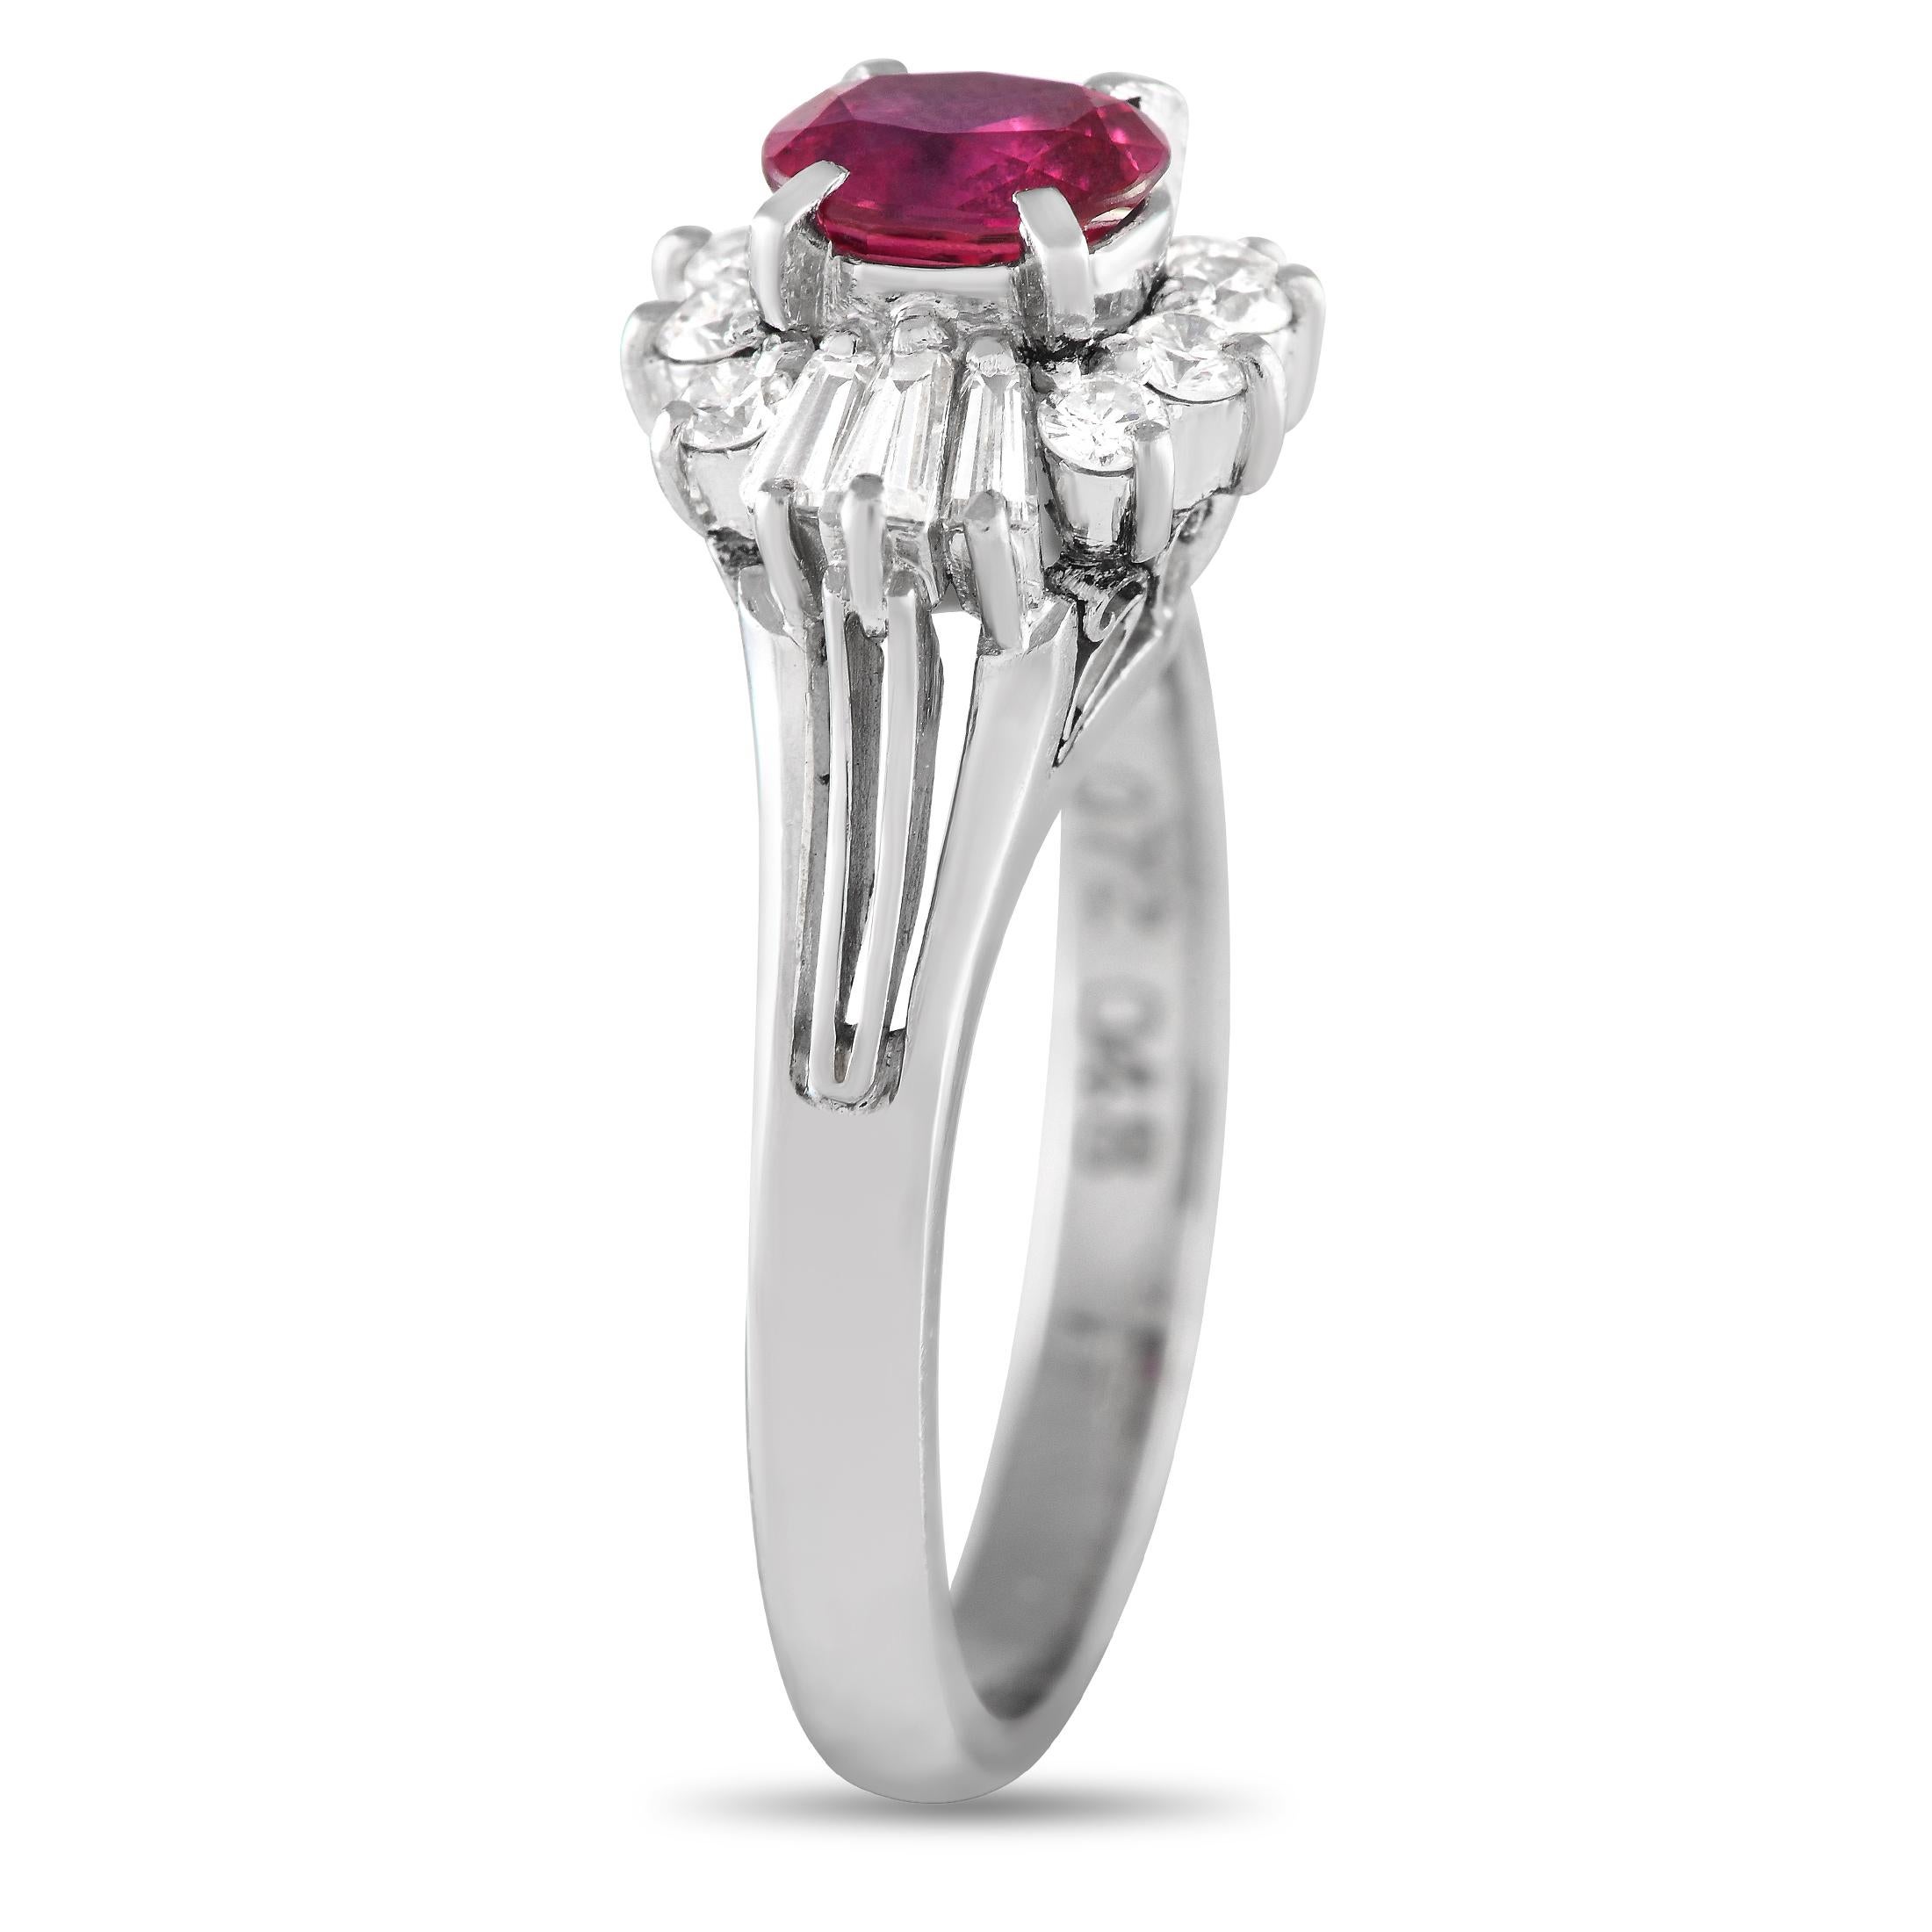 This sophisticated ring infused with Art Deco elegance is for an old soul seeking a ring with vintage flair. It offers a balanced arrangement of tapered baguette and round diamonds encircling a beautiful 0.72 ct oval ruby. The ring's top dimensions